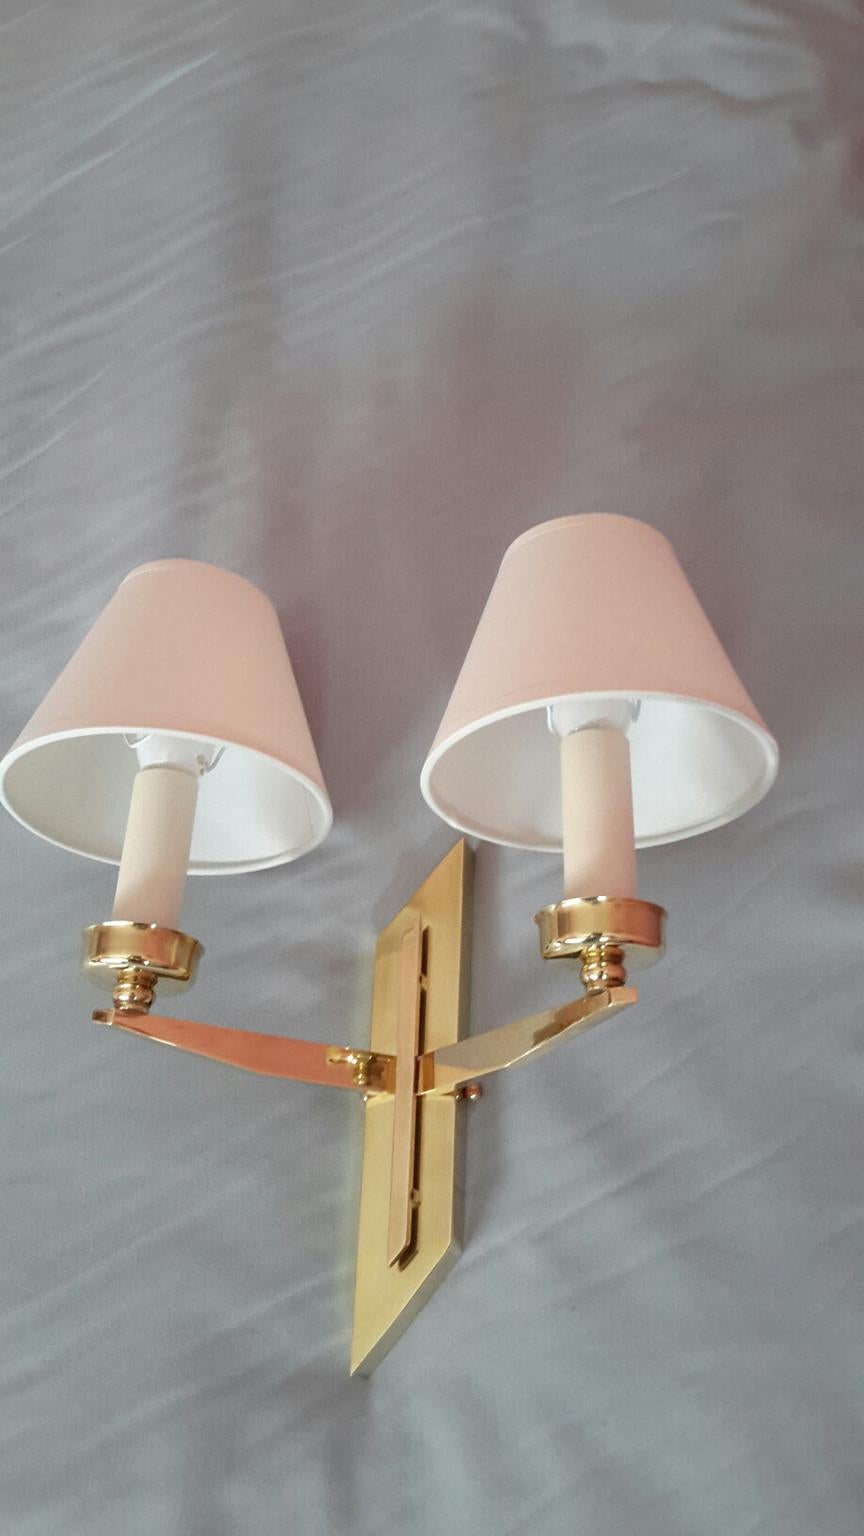 Gilt Pair of French Mid-Century Modern Sconces by Maison Lunel, 1950